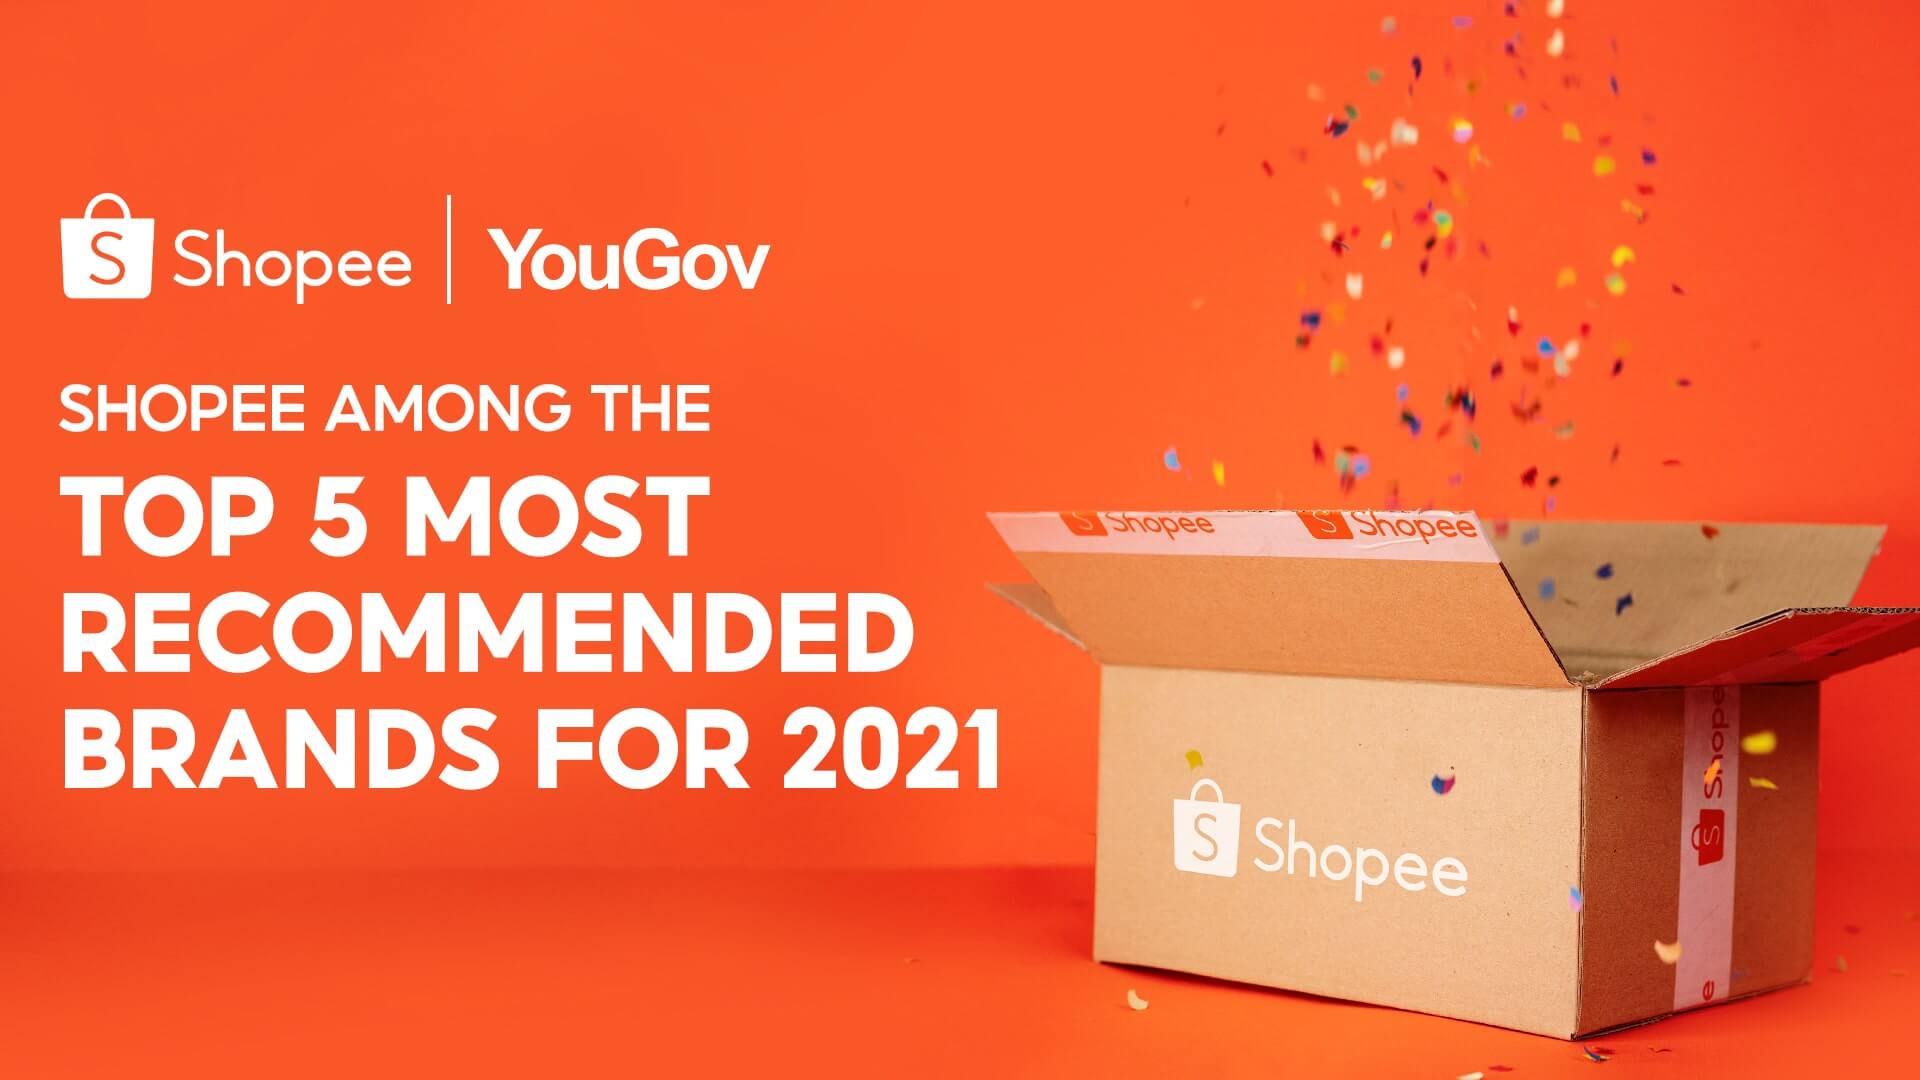 Shopee Rises Up the Ranks in YouGov’s Most Recommended Brands for 2021